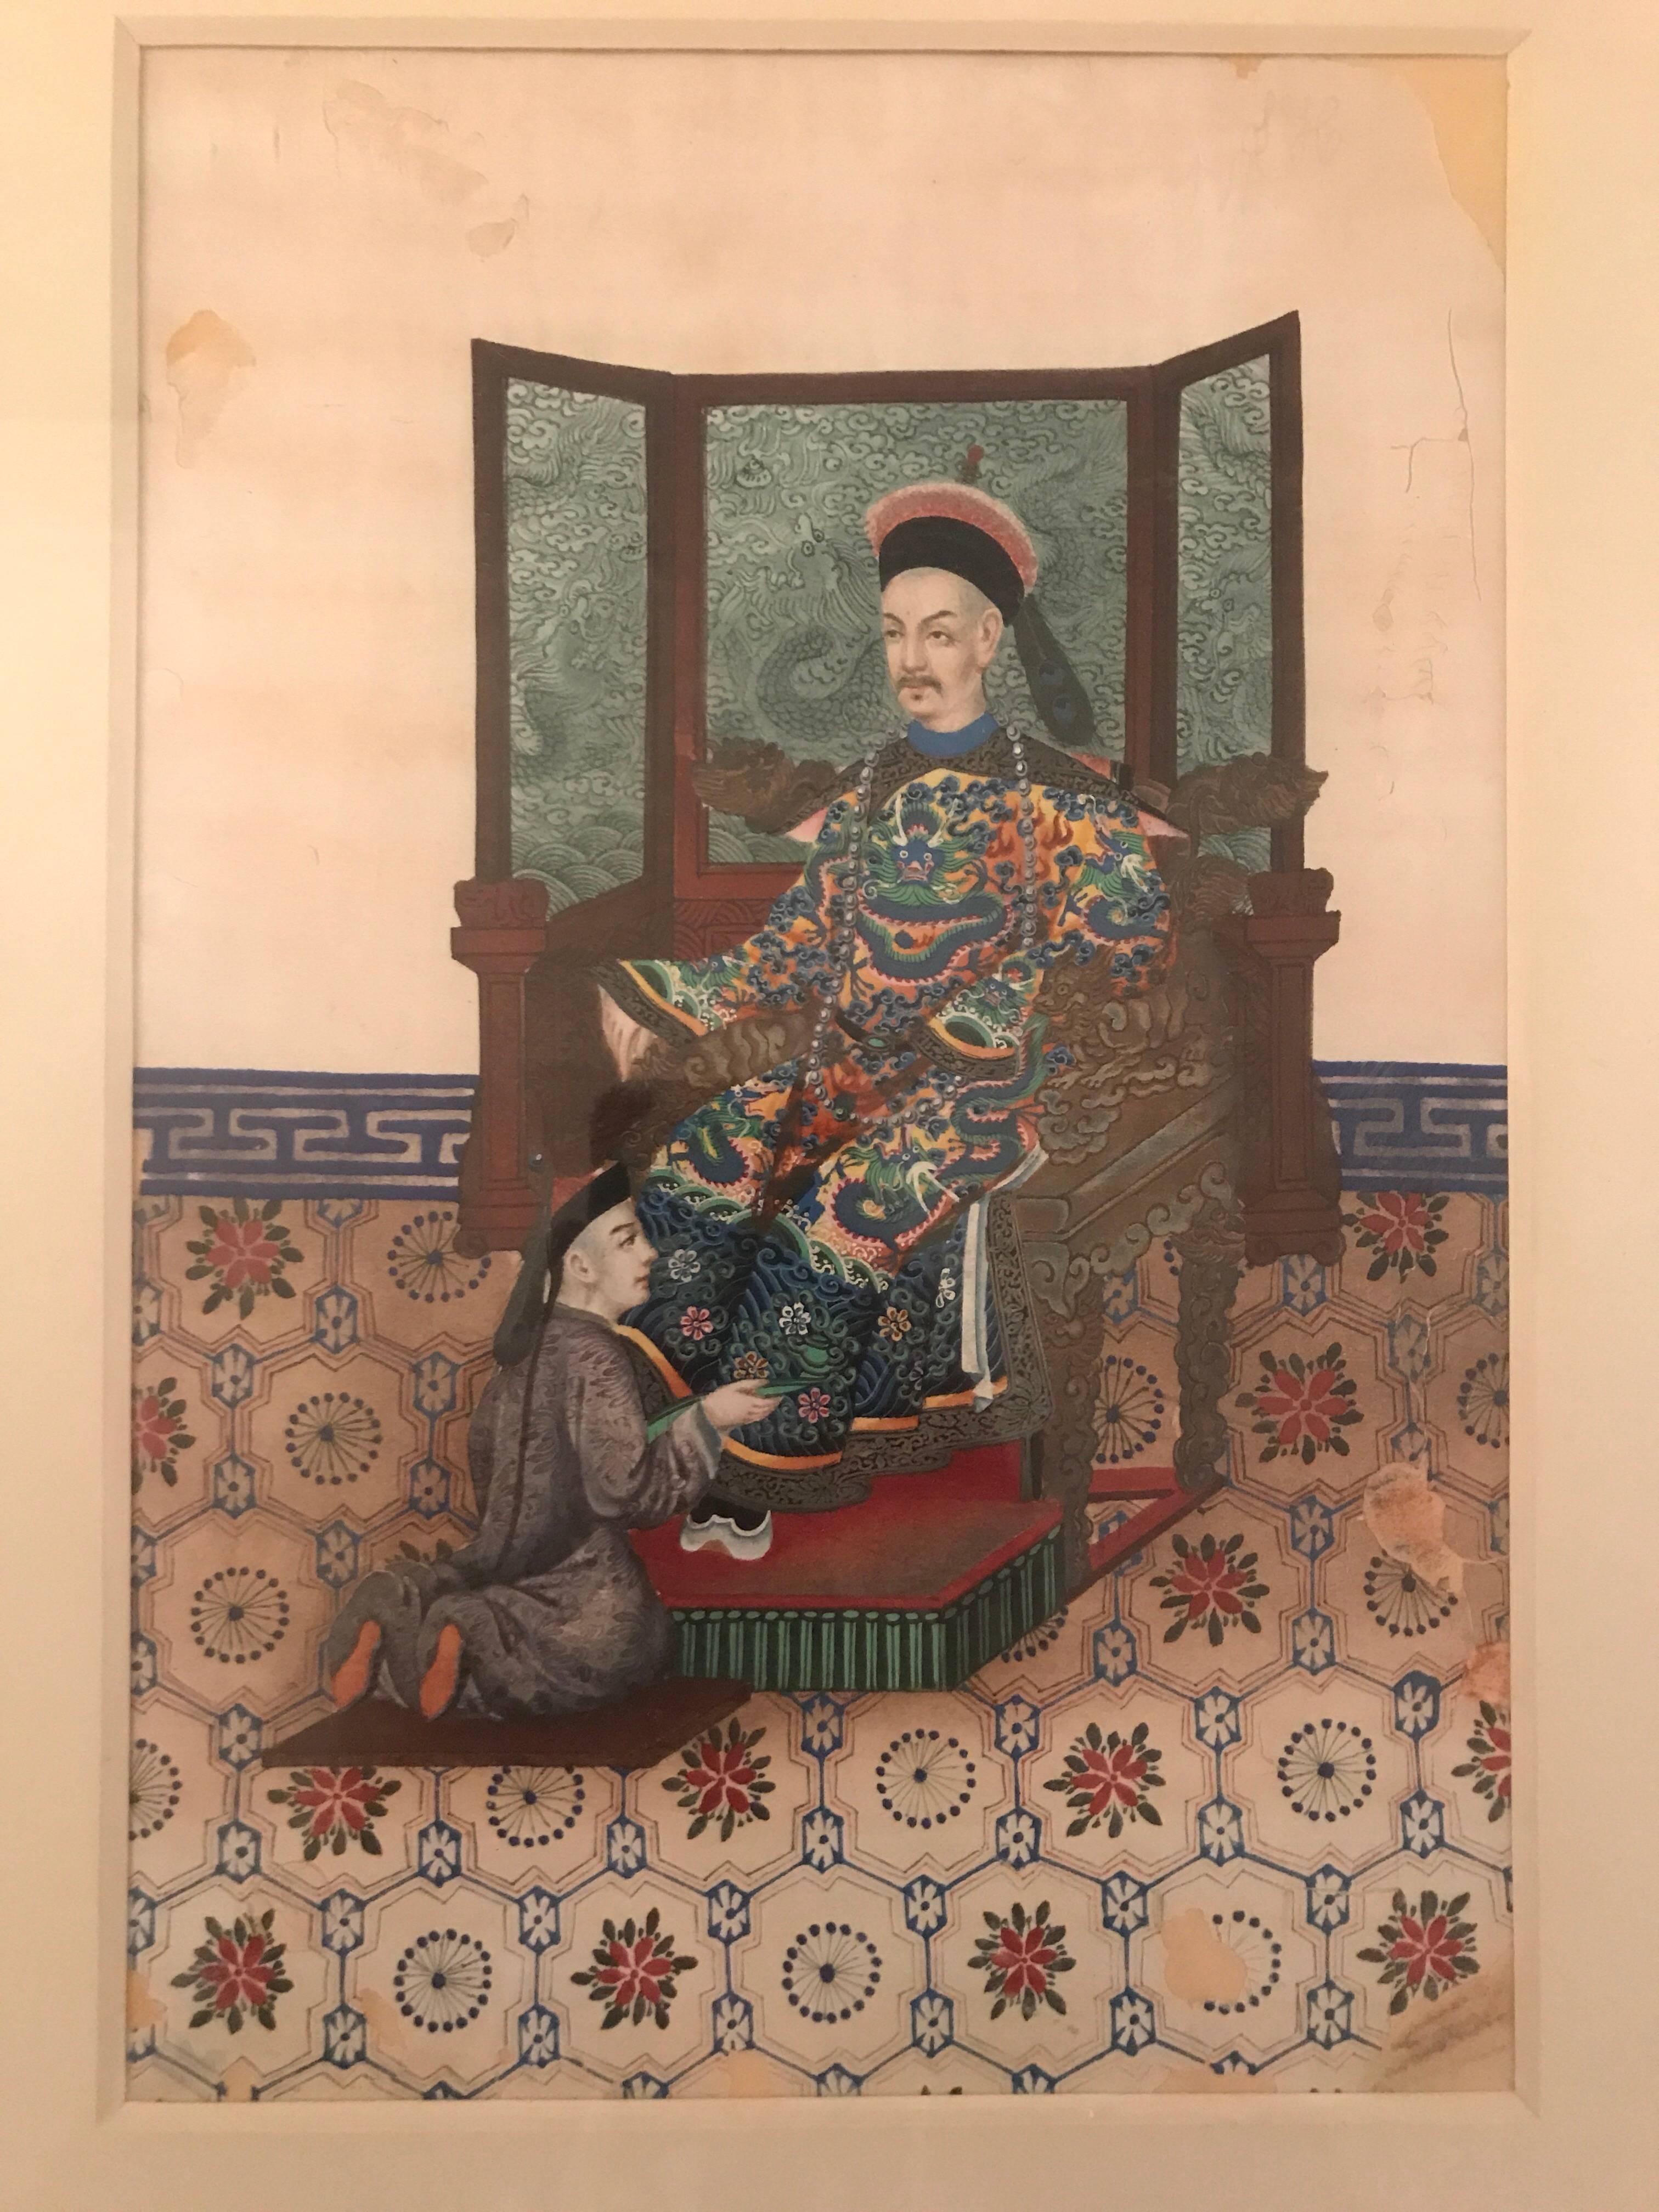 Pair of very high quality antique Chinese ancestor portraits on ricepaper.
These paintings are made with incredible skill and they are painted in such accuracy and the details are just amazing, the robes, the background with the dragon is just